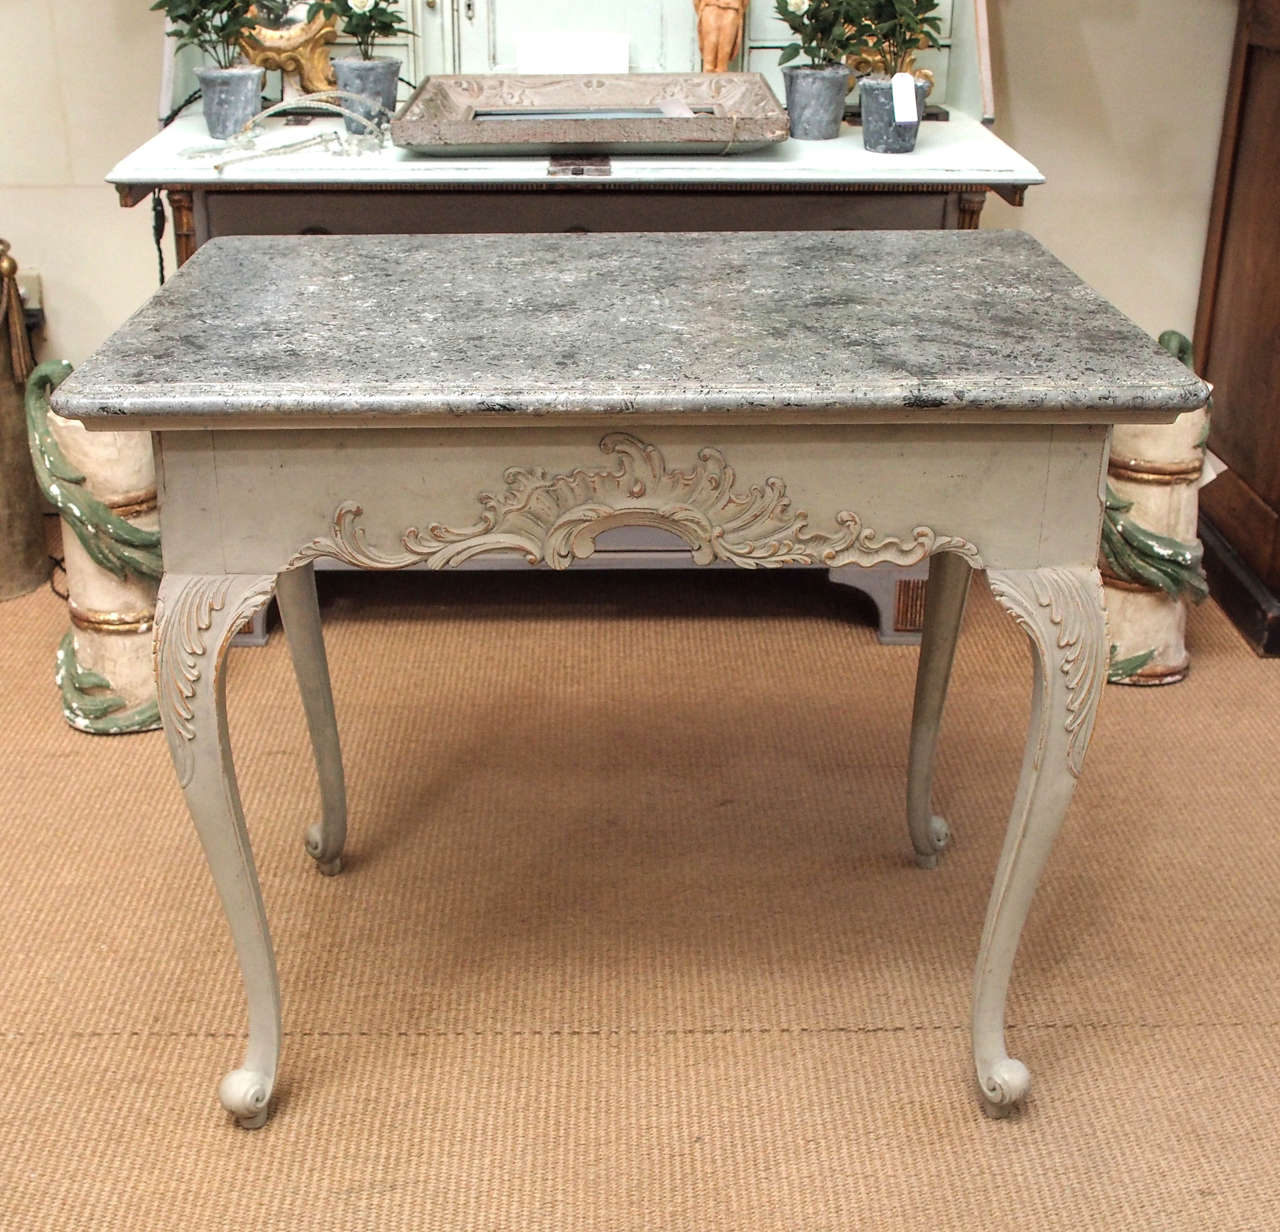 beautifully carved, lovely color, great scale 18th c period Gustavian  table with faux marble top.